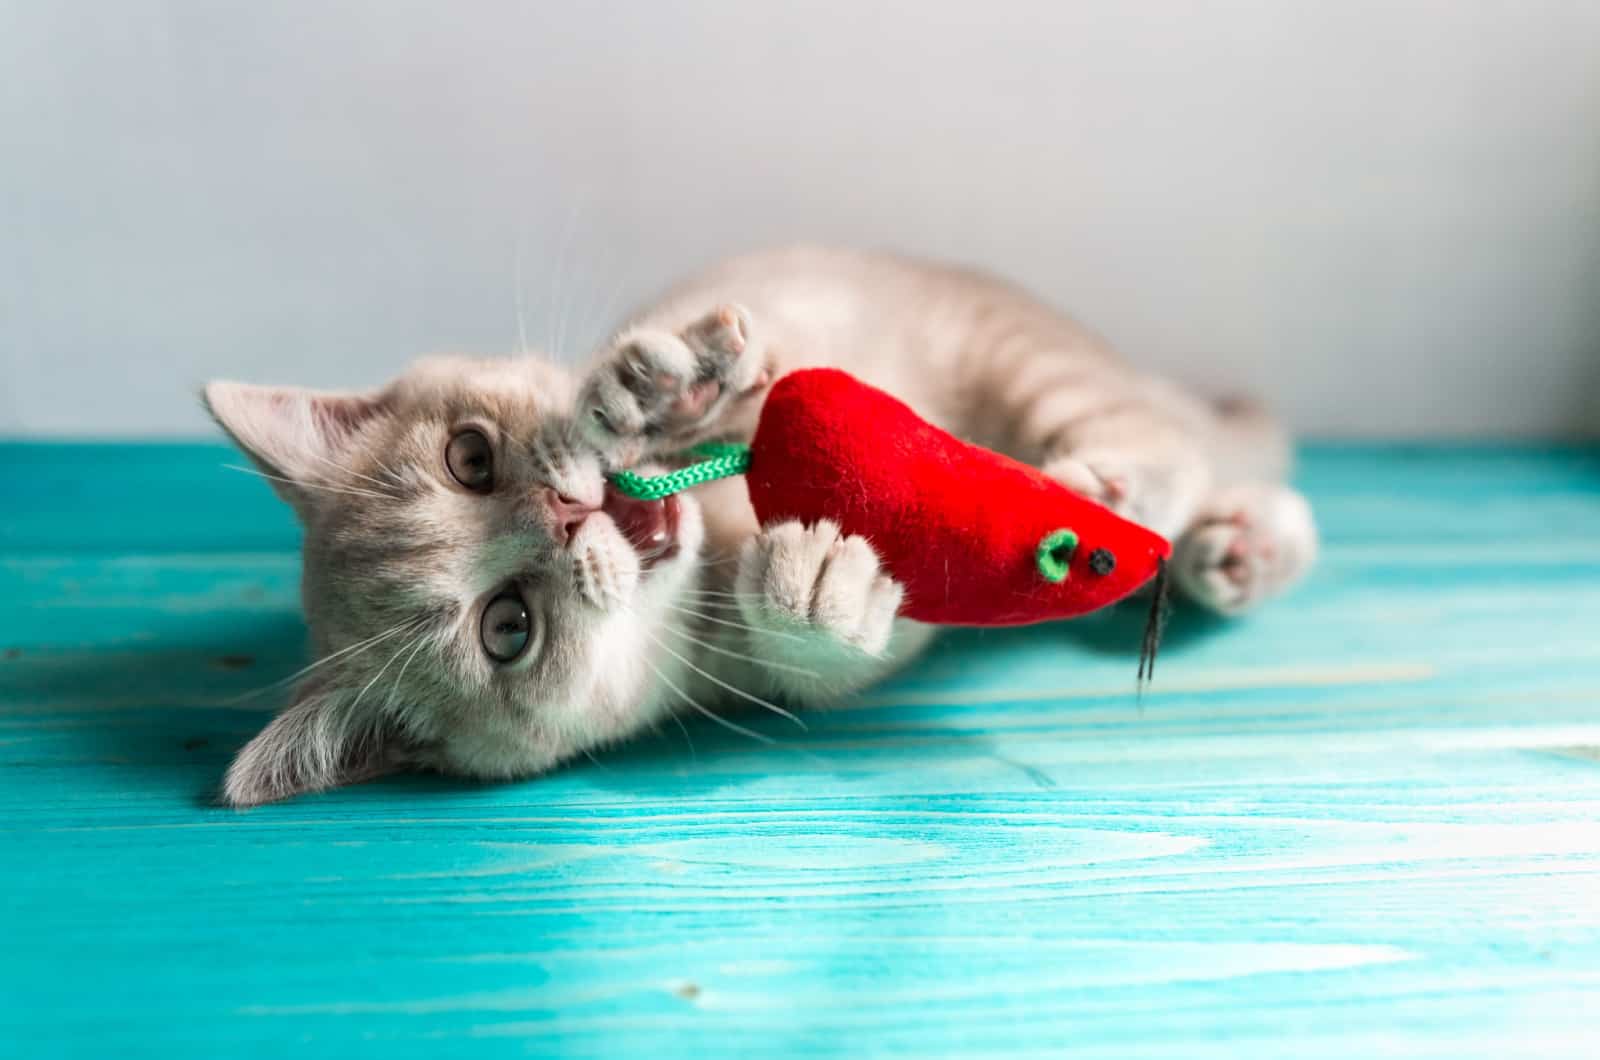 kitten playing with a toy